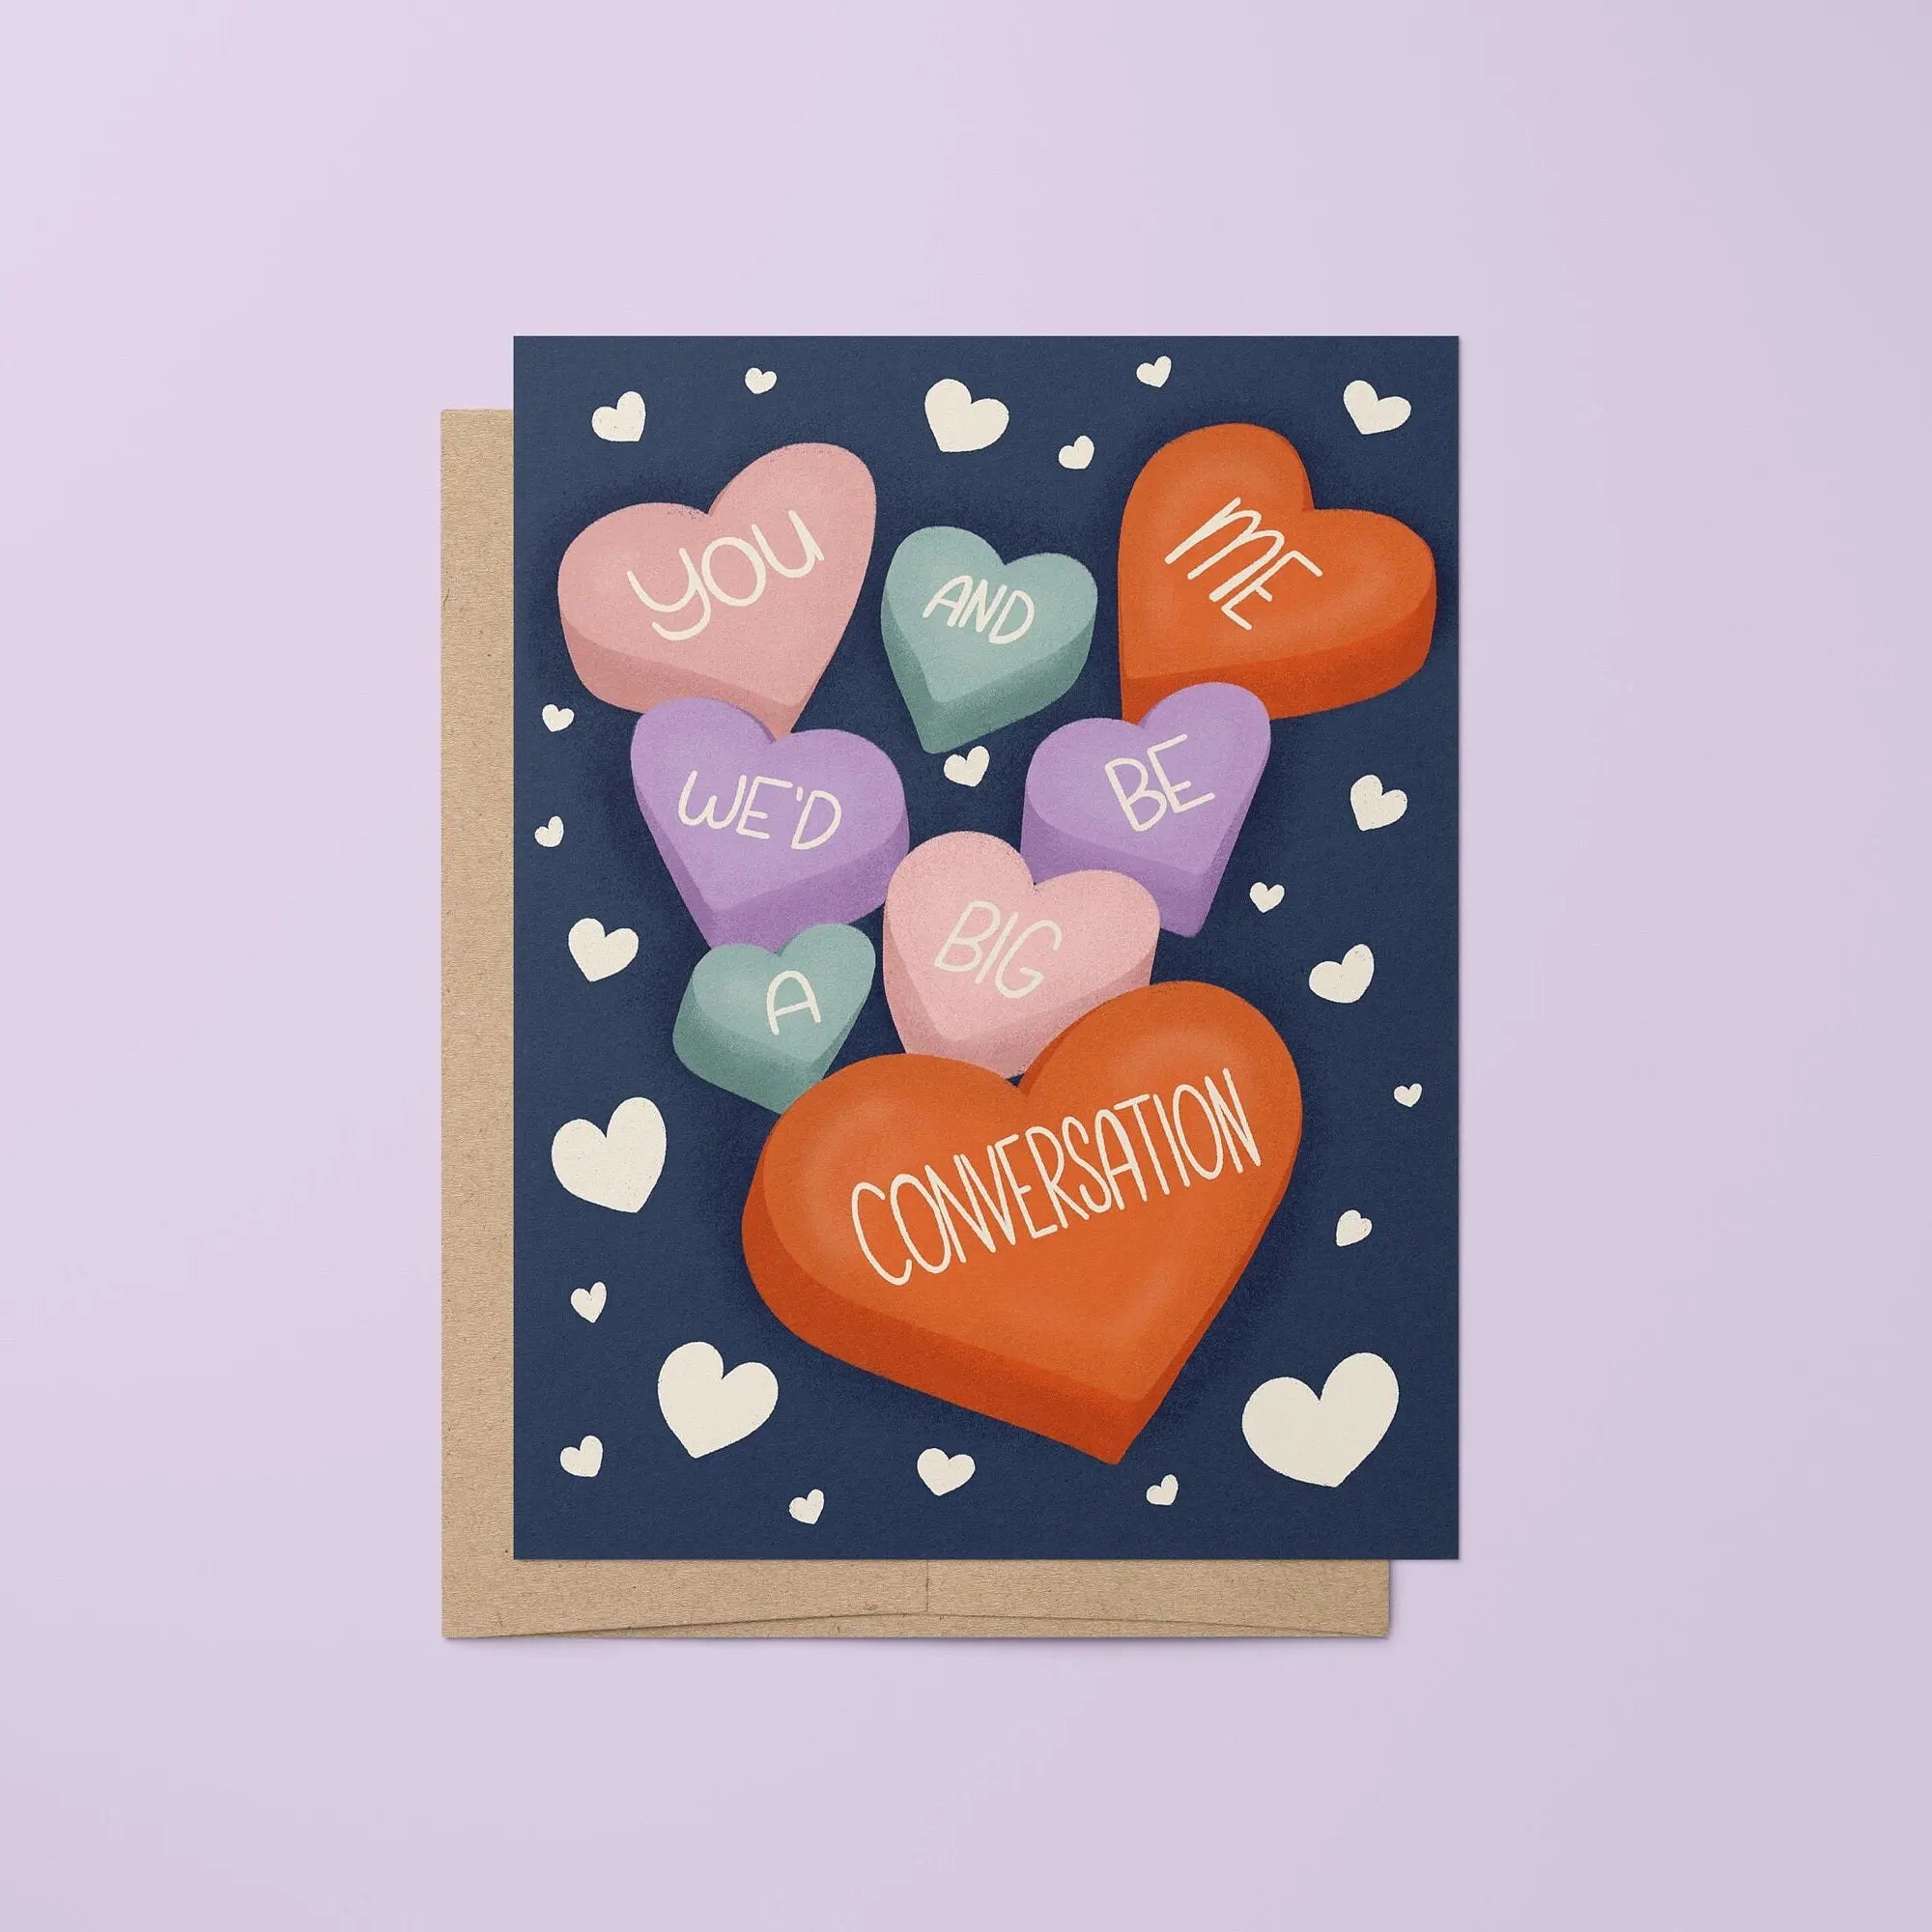 You and me we'd be a big conversation greeting card MangoIllustrated